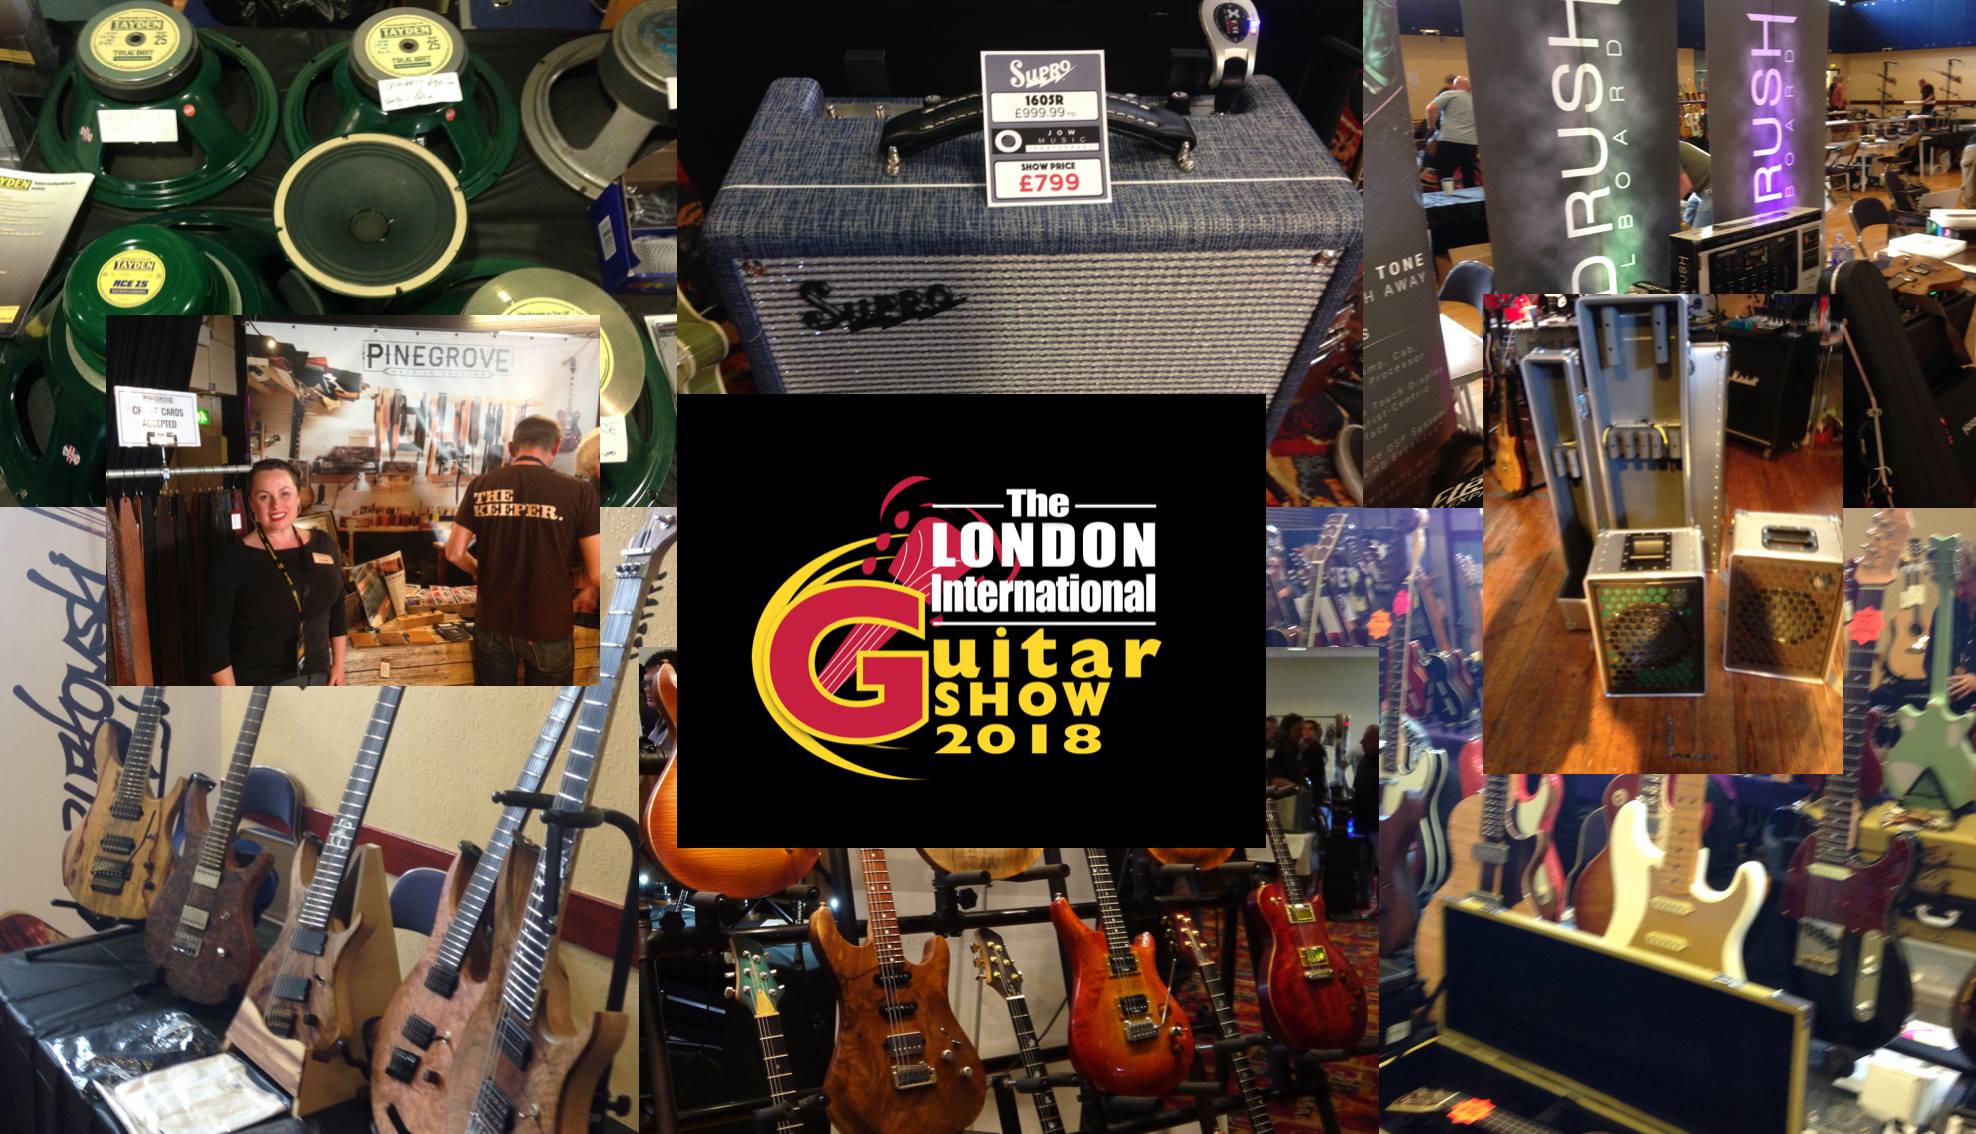 Home of Tone at the London International Guitar Show